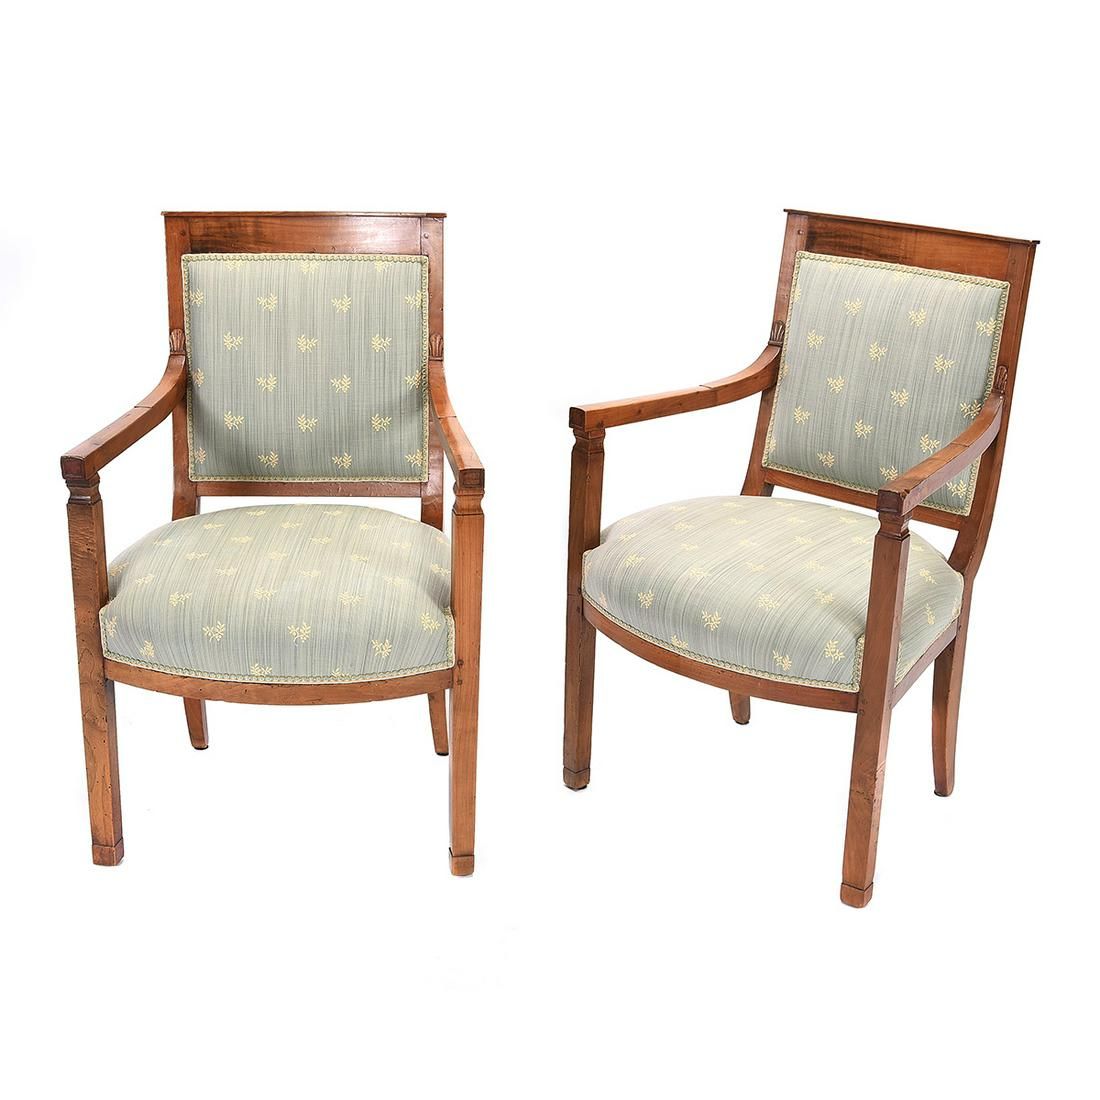 AF2-242: ANTIQUE PAIR OF EARLY 19TH CENTURY FRENCH DIRECTOIRE FRUITWOOD FAUTEUIL ARMCHAIRS